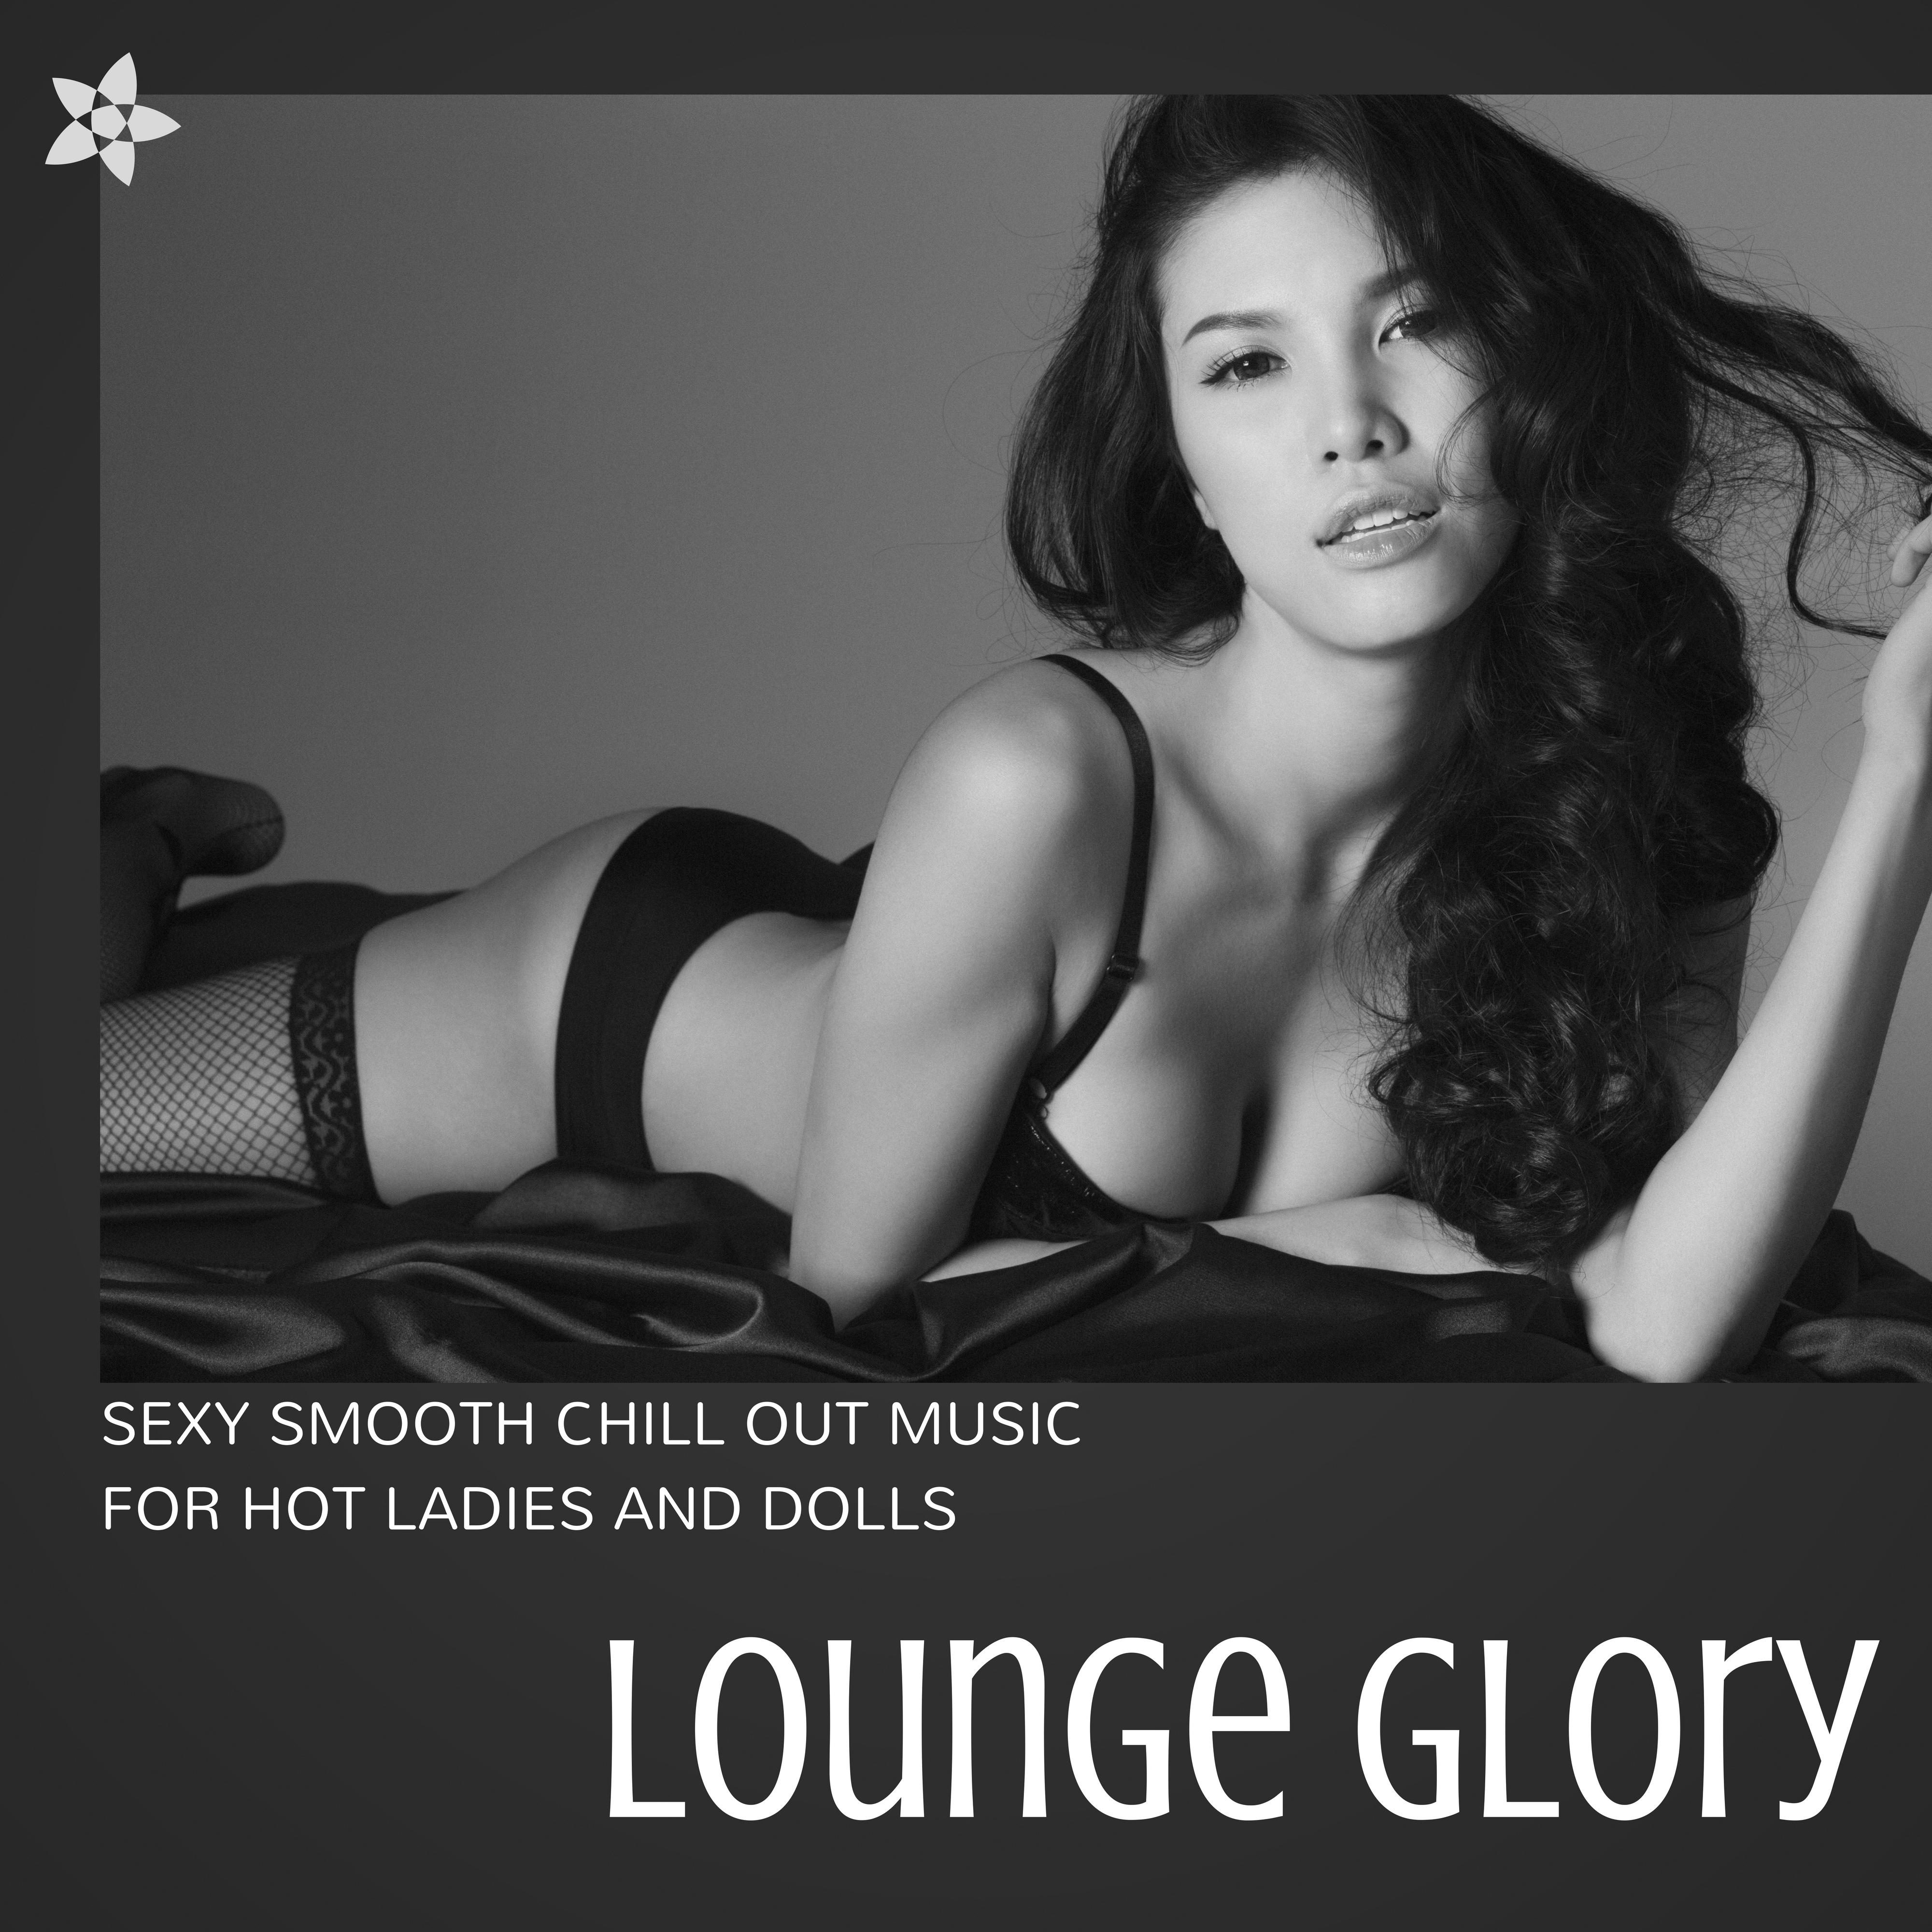 Lounge Glory - **** Smooth Chill Out Music for Hot Ladies and Dolls